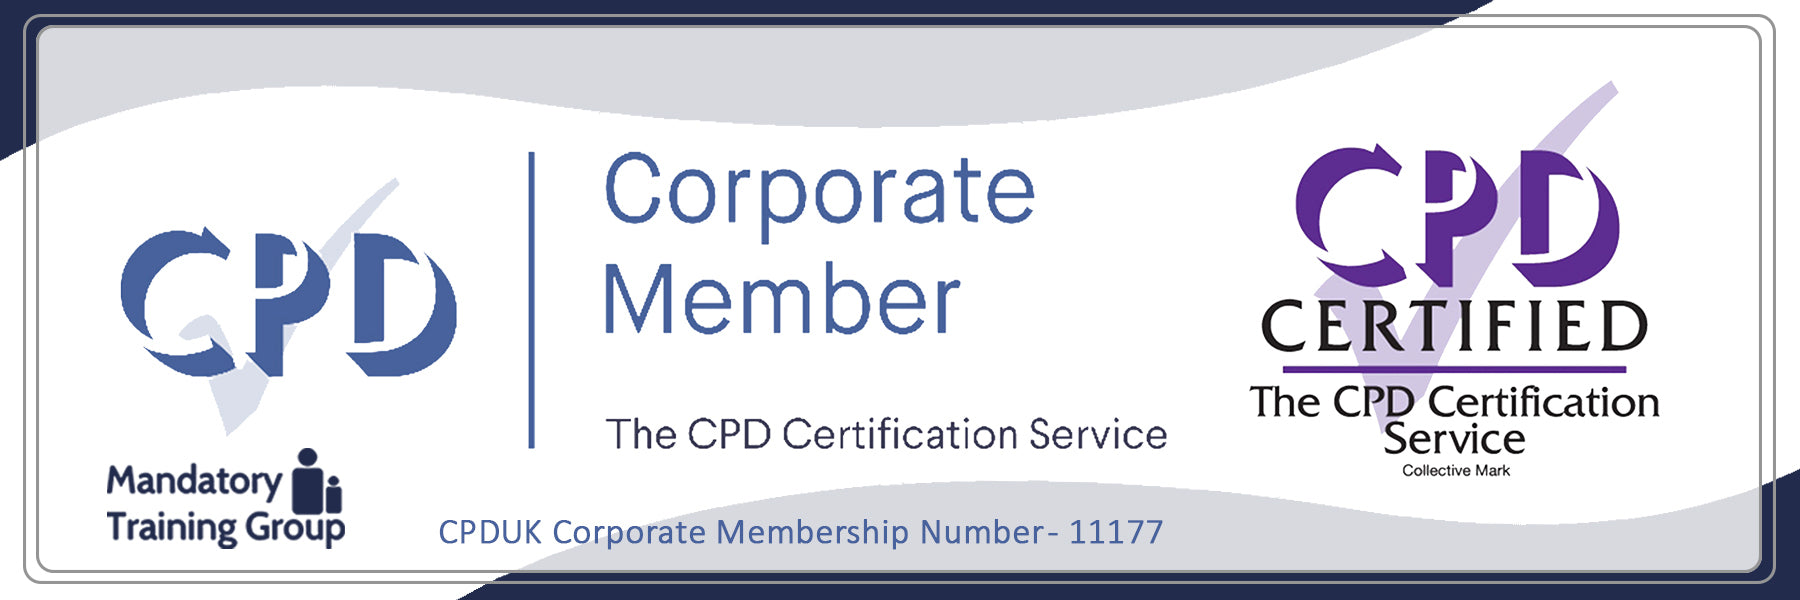 Care Certificate Standard 8 - Train the Trainer + Trainer Pack - Online CPD Course - The Mandatory Training Group UK - (2)